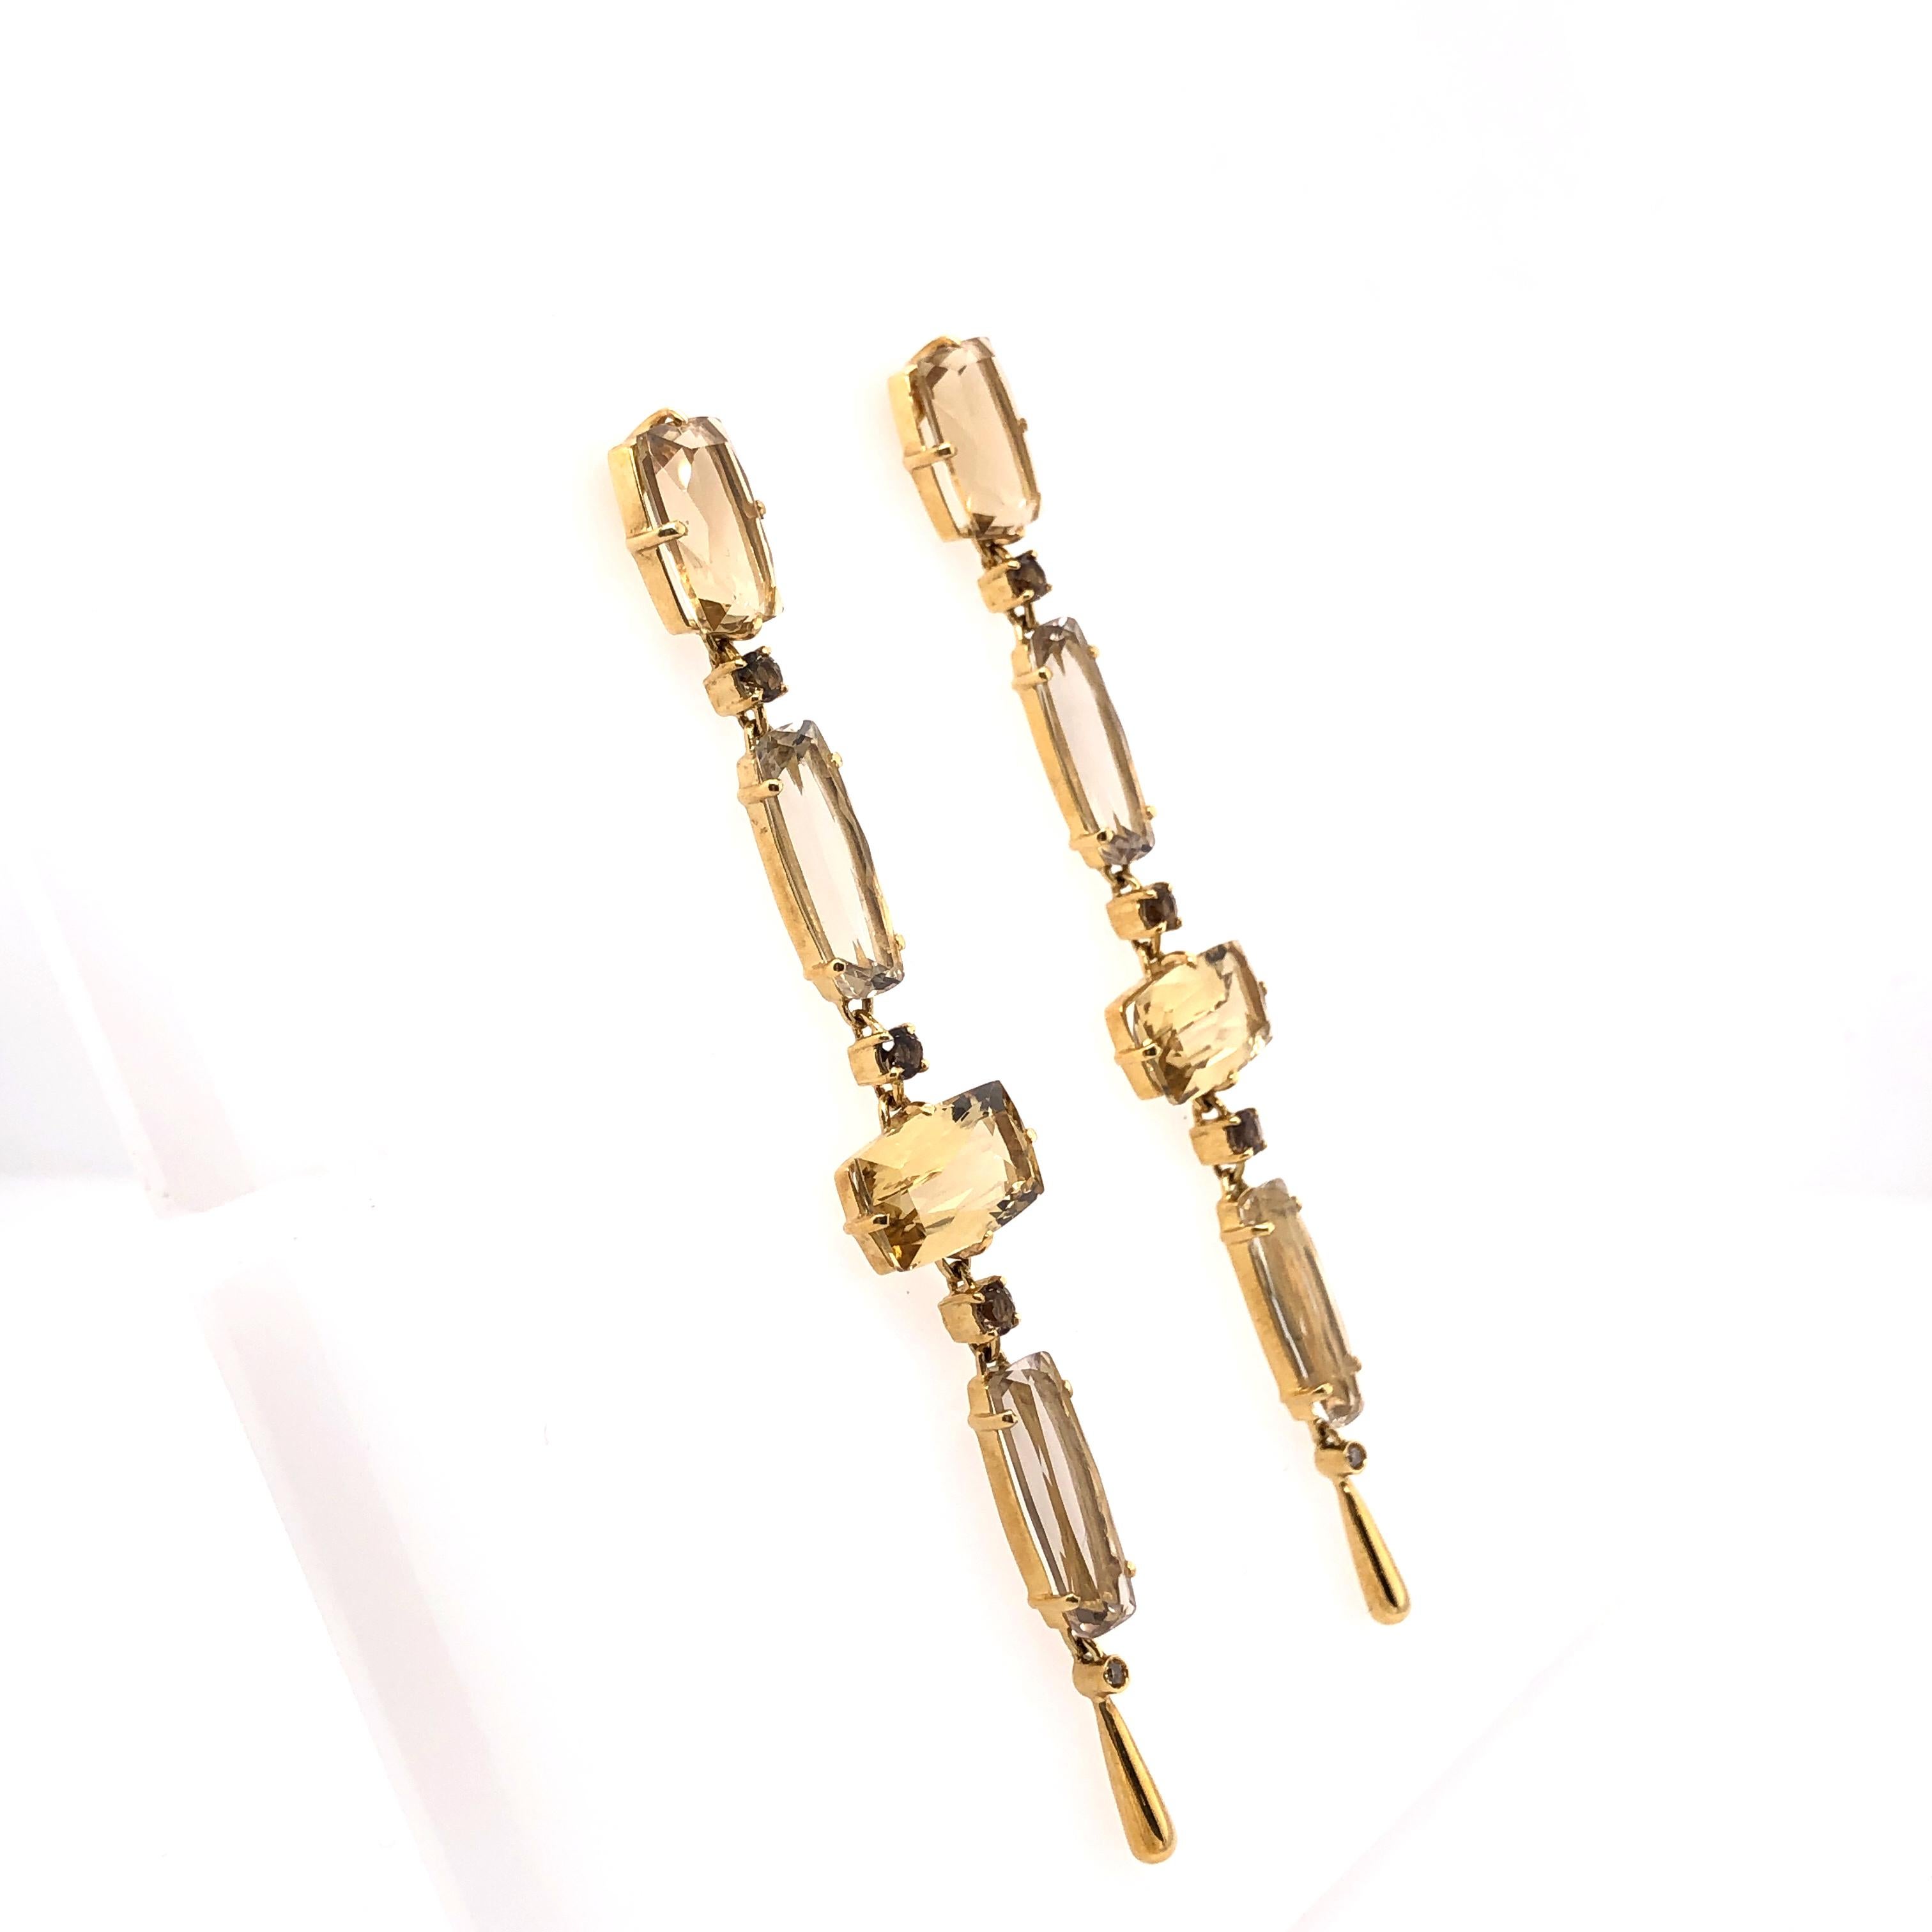 Stunning Citrine and Quartz Mix Gem Drop Earrings set in 18K Yellow Gold.
Cushion Cut Citrine Total Carat Weight 14.50 CT
Quartz Total Carat Weight 13.15 CT

For any Special Occasion